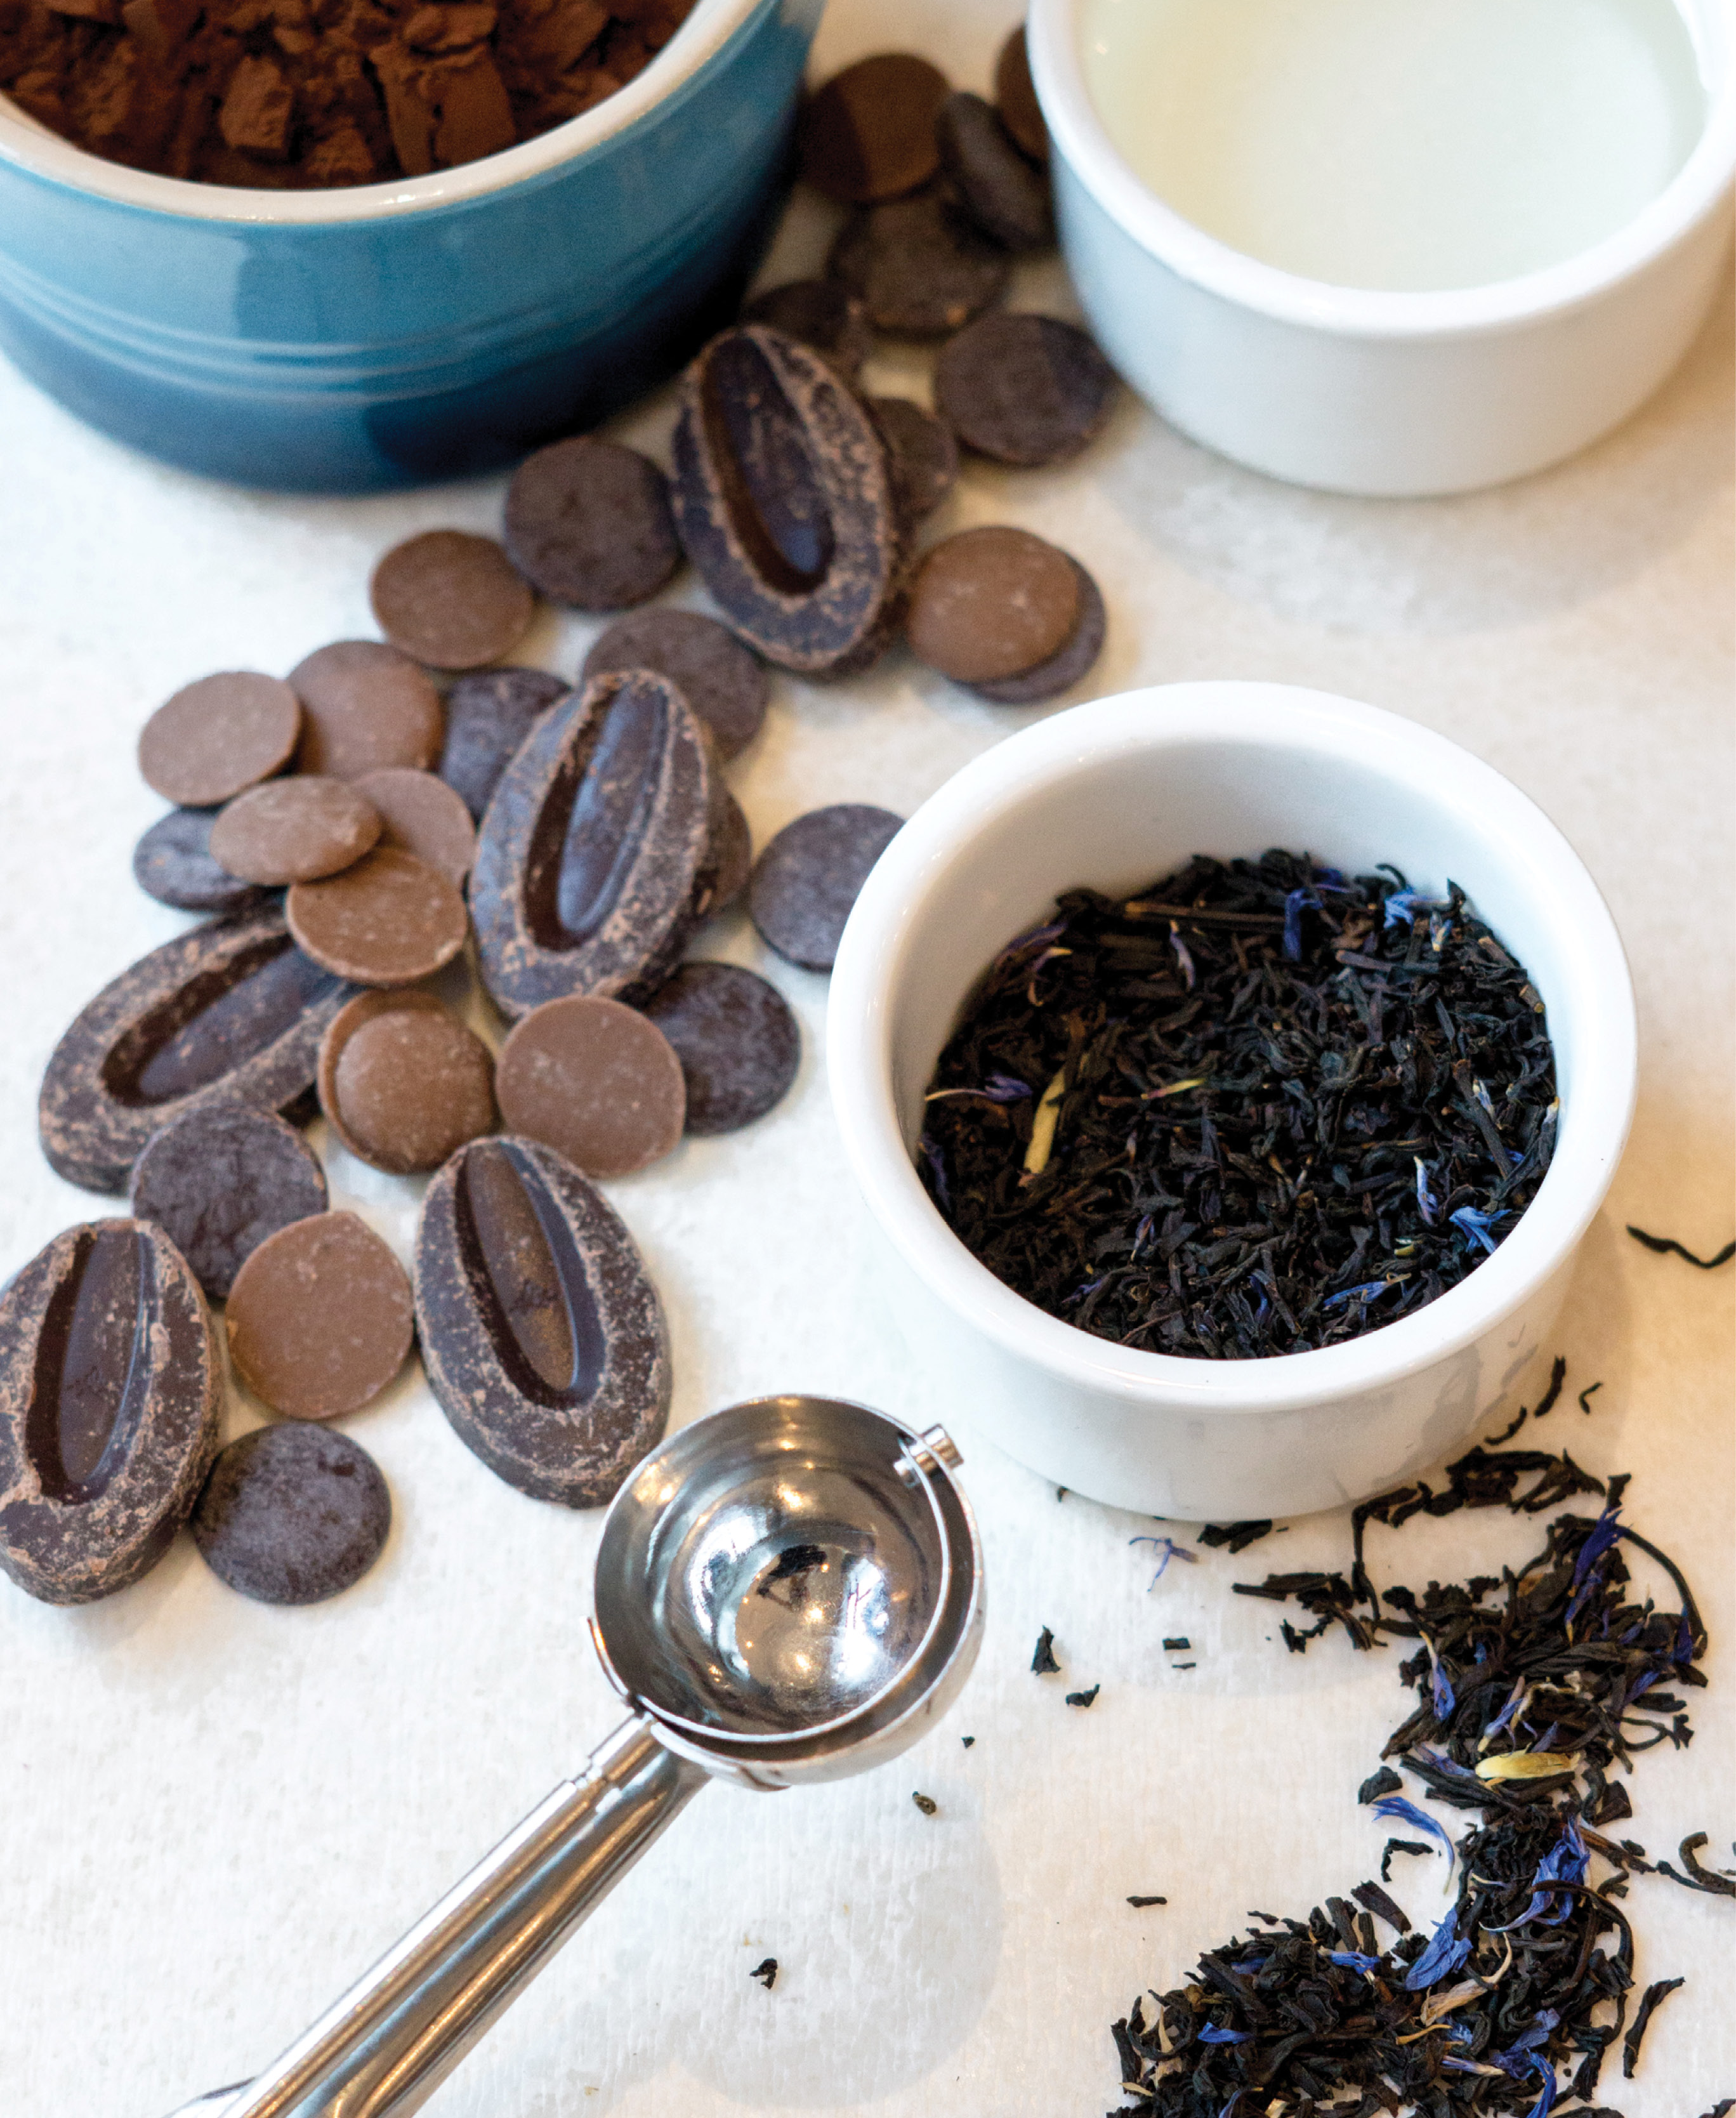 While cornflower petals bestow this tea with flecks of fetching royal blue, Earl Grey is most recognizable for its bergamot flavor—a uniquely floral character that makes an intriguing addition to a number of desserts.